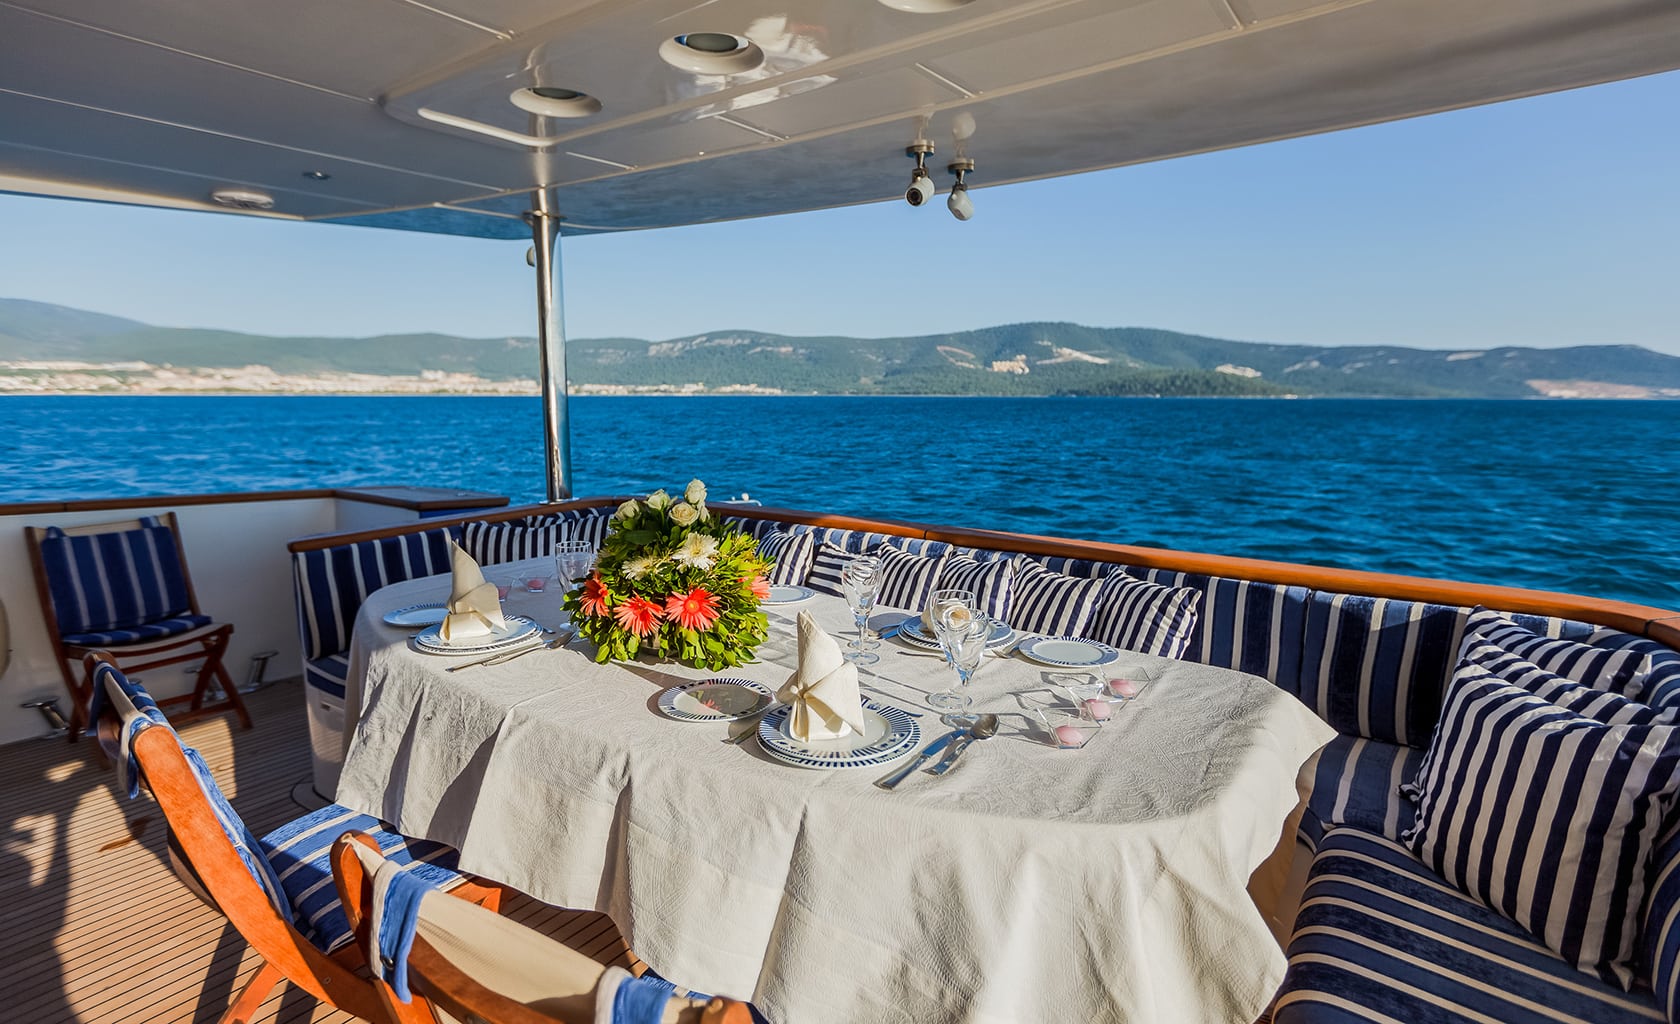 JOHNSON BABY Dining area on Aft deck